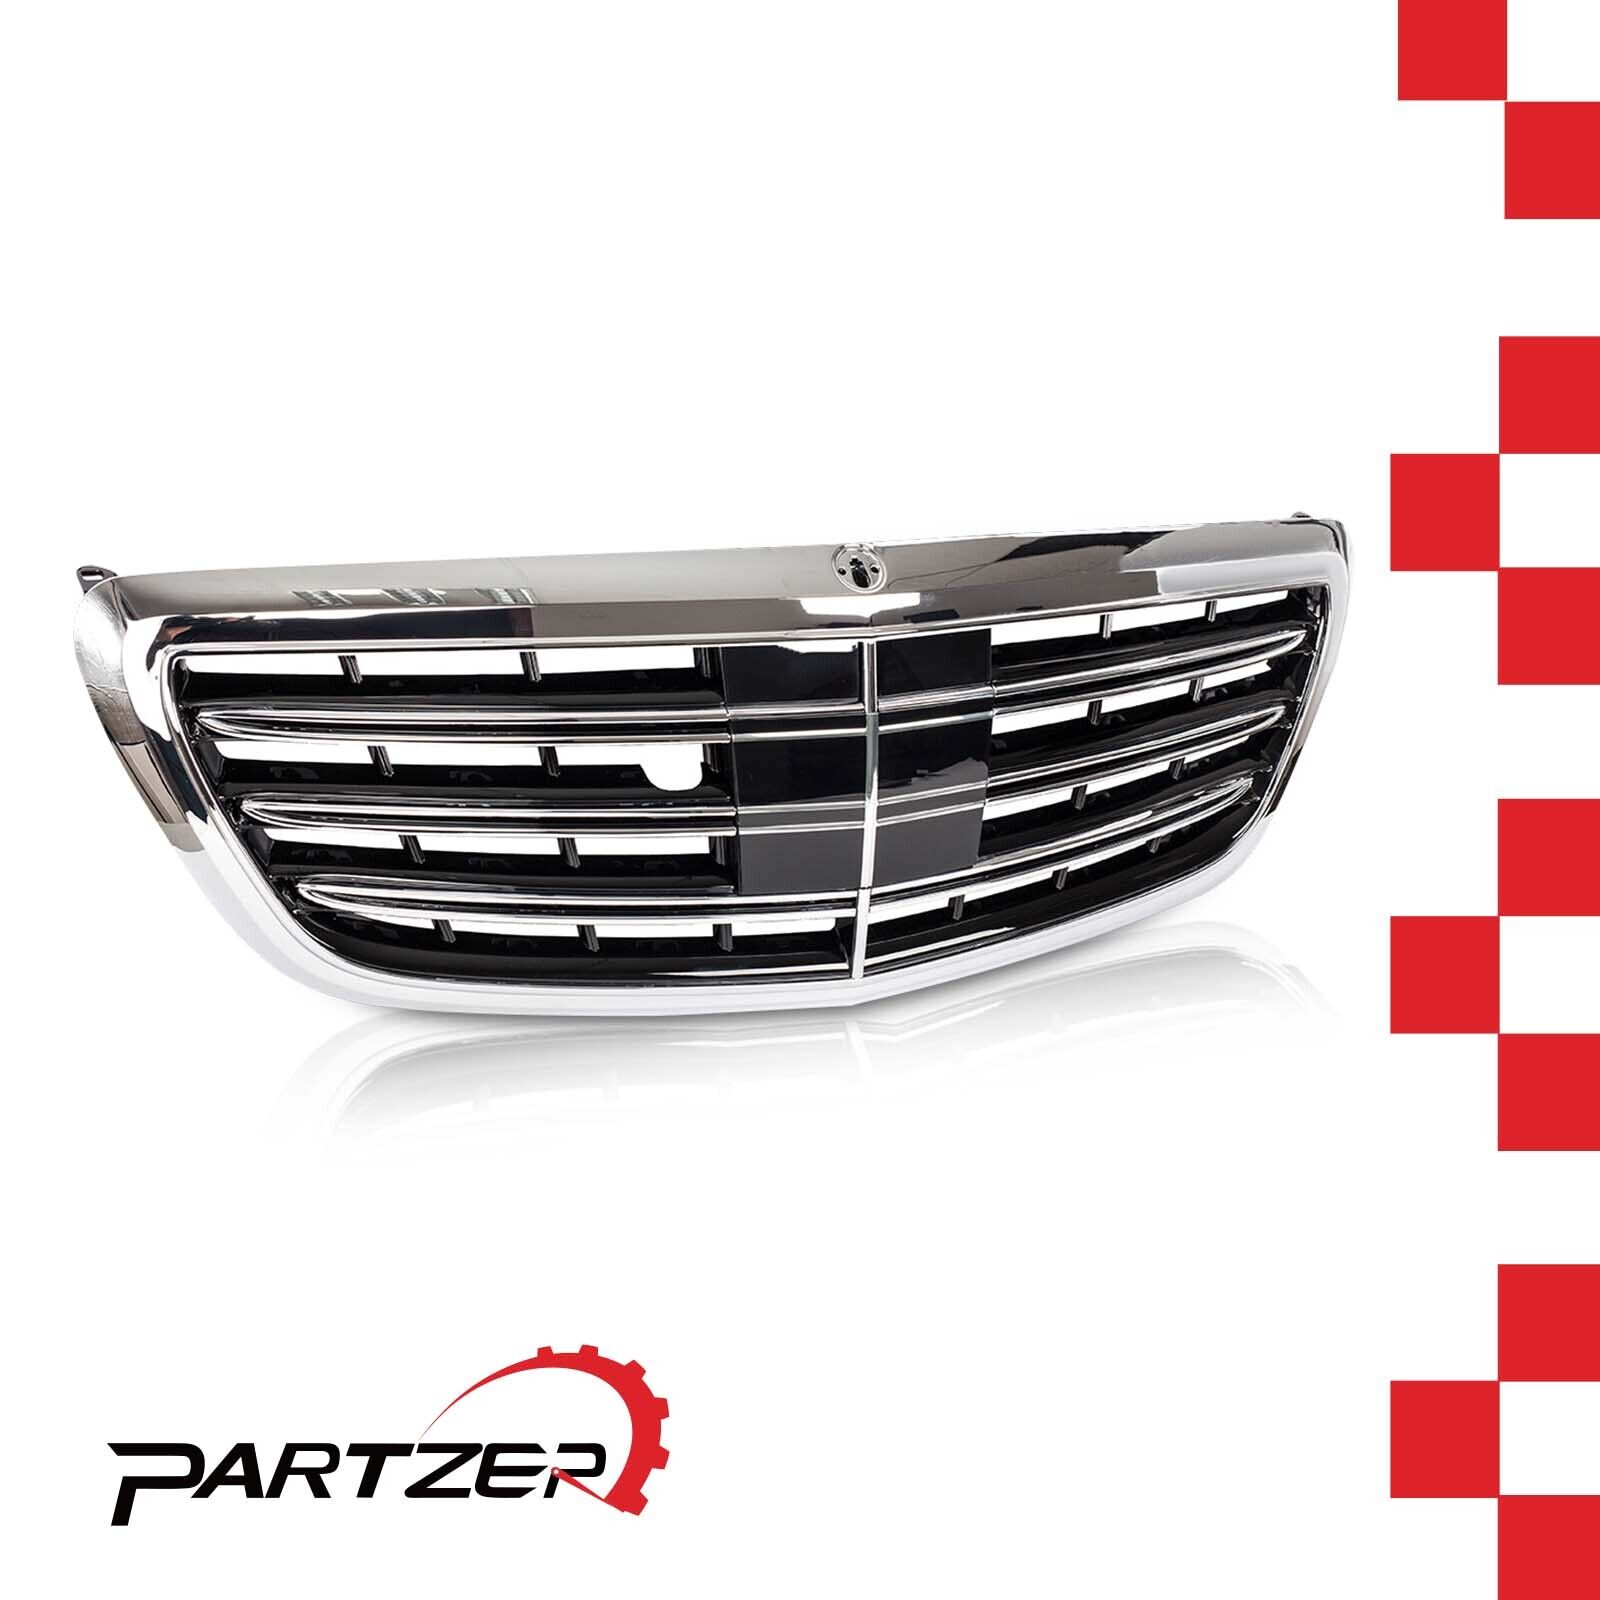 Fits For Mercedes Benz S-Class W222 2014-2020 Chrome Front Bumper Grill